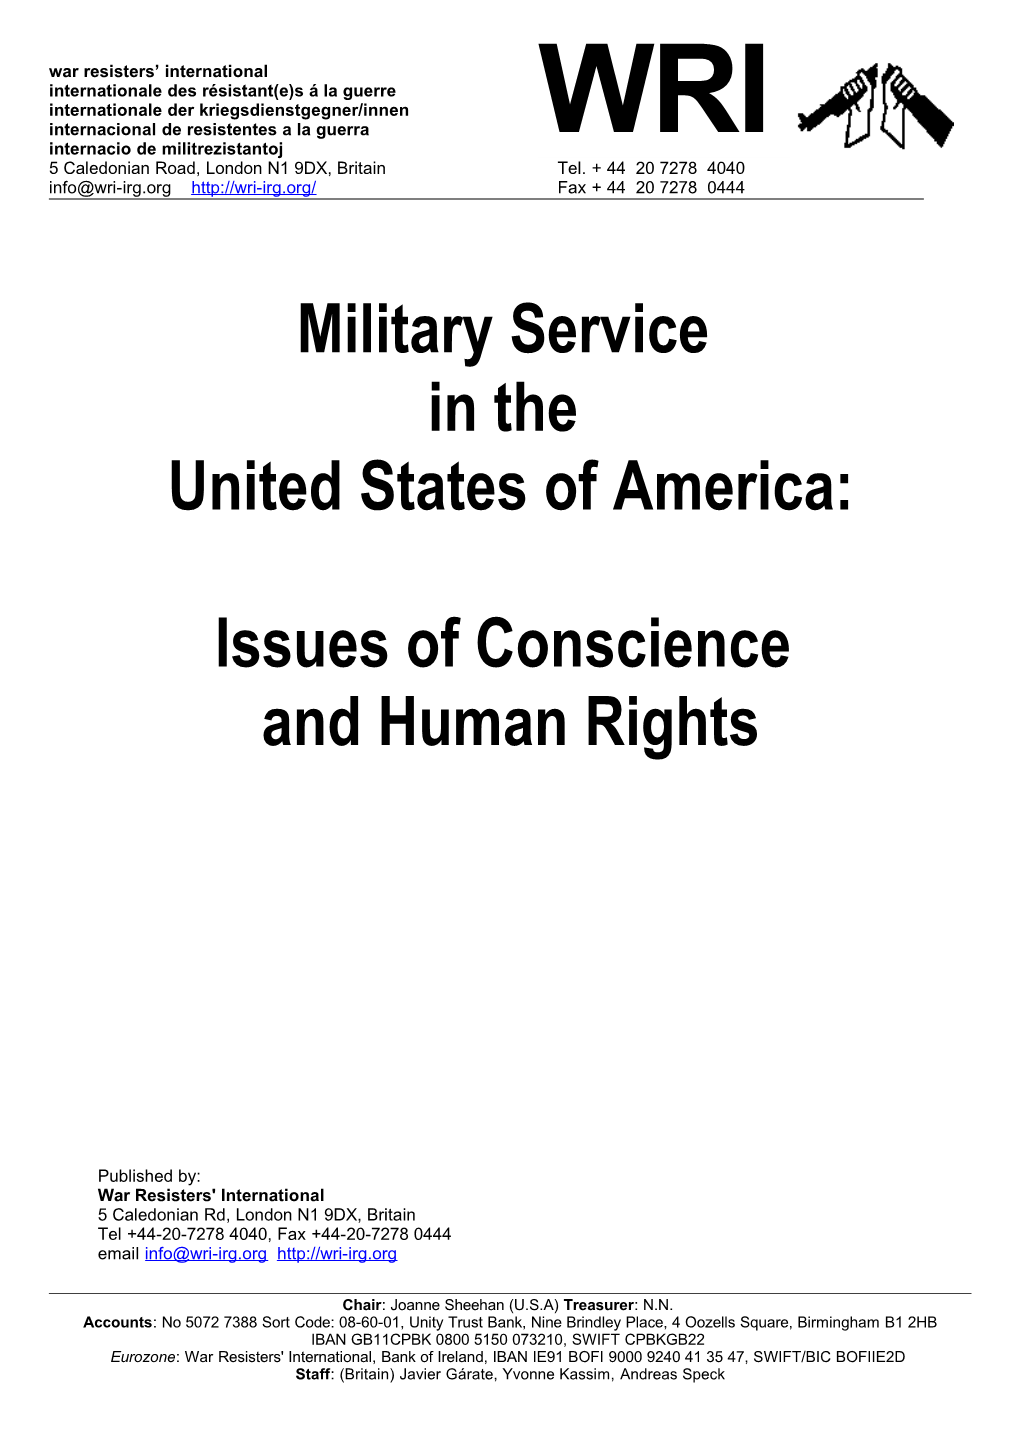 Military Service in the United States of America